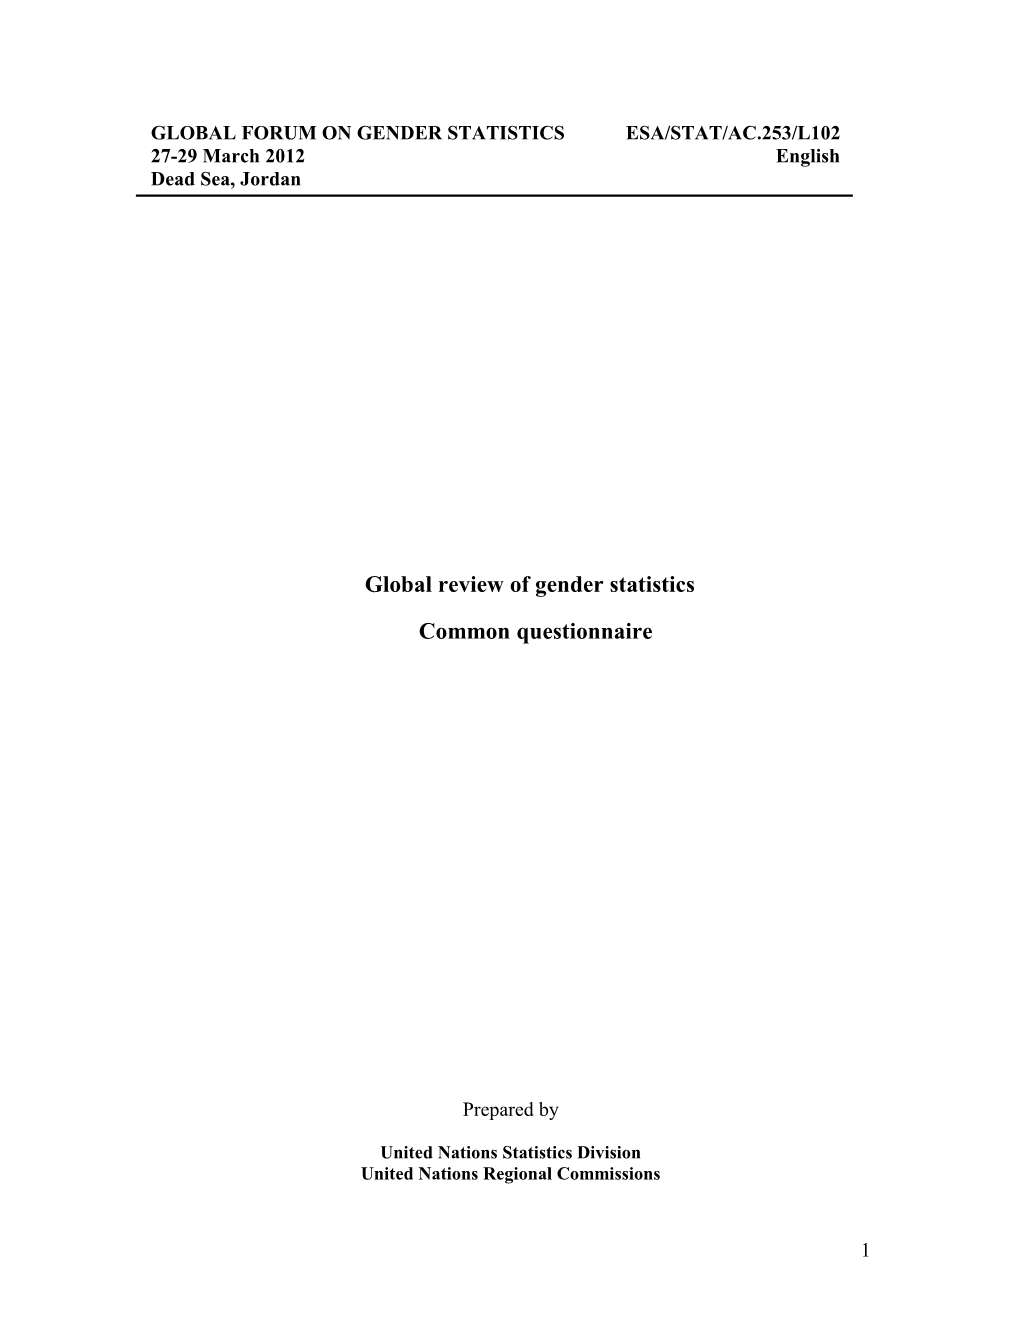 Three Documents Reviewed in the Development of the Outline: 2004 UNECE/UNDP Questionnaire